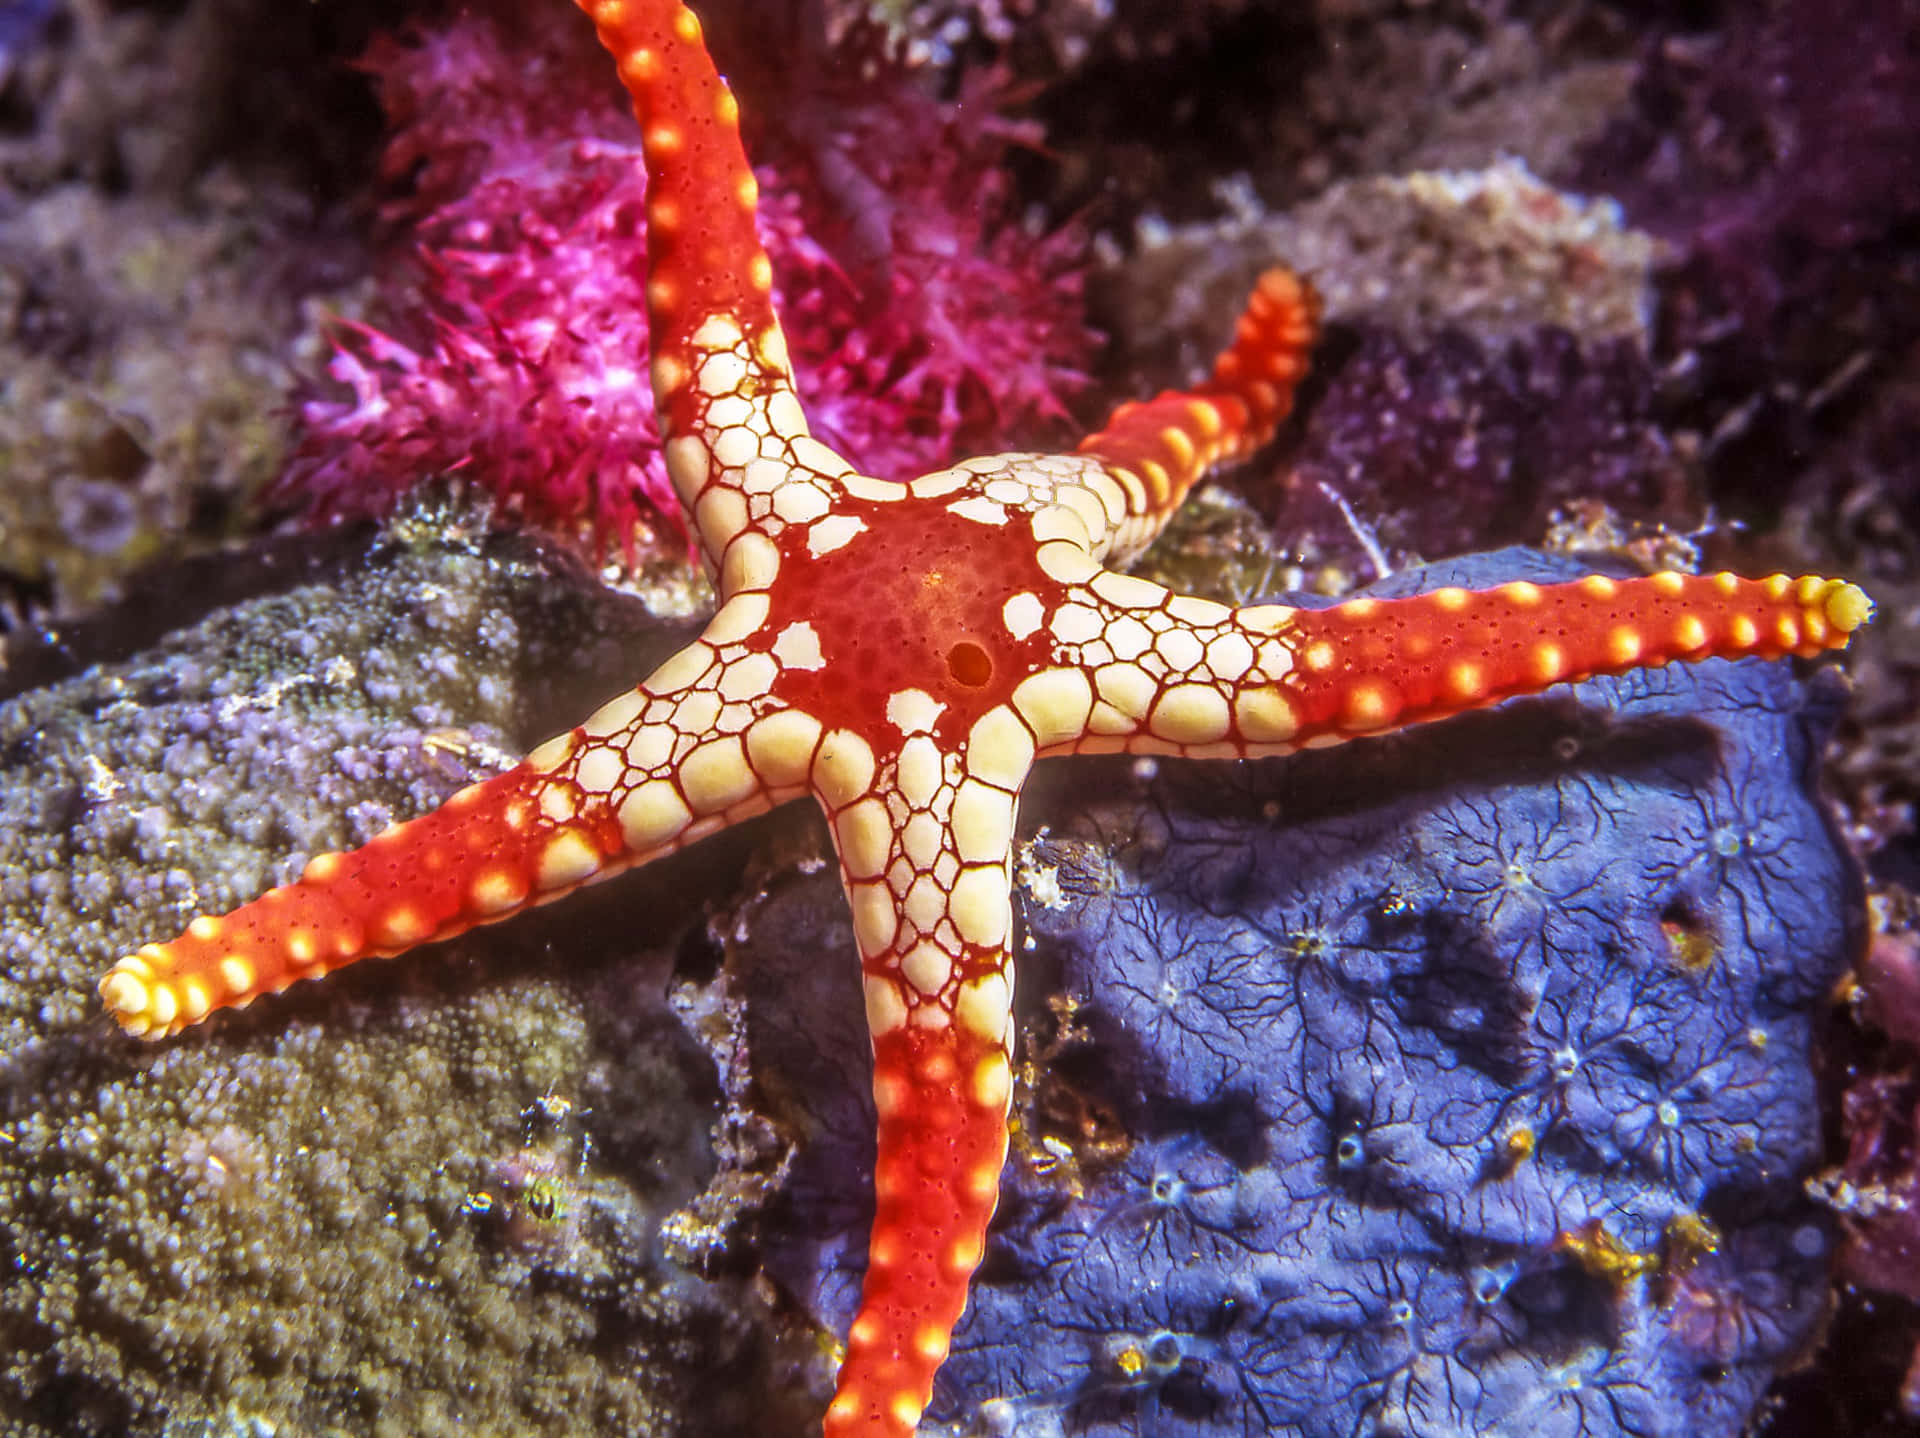 Red Starfish calmly resting on the seafloor